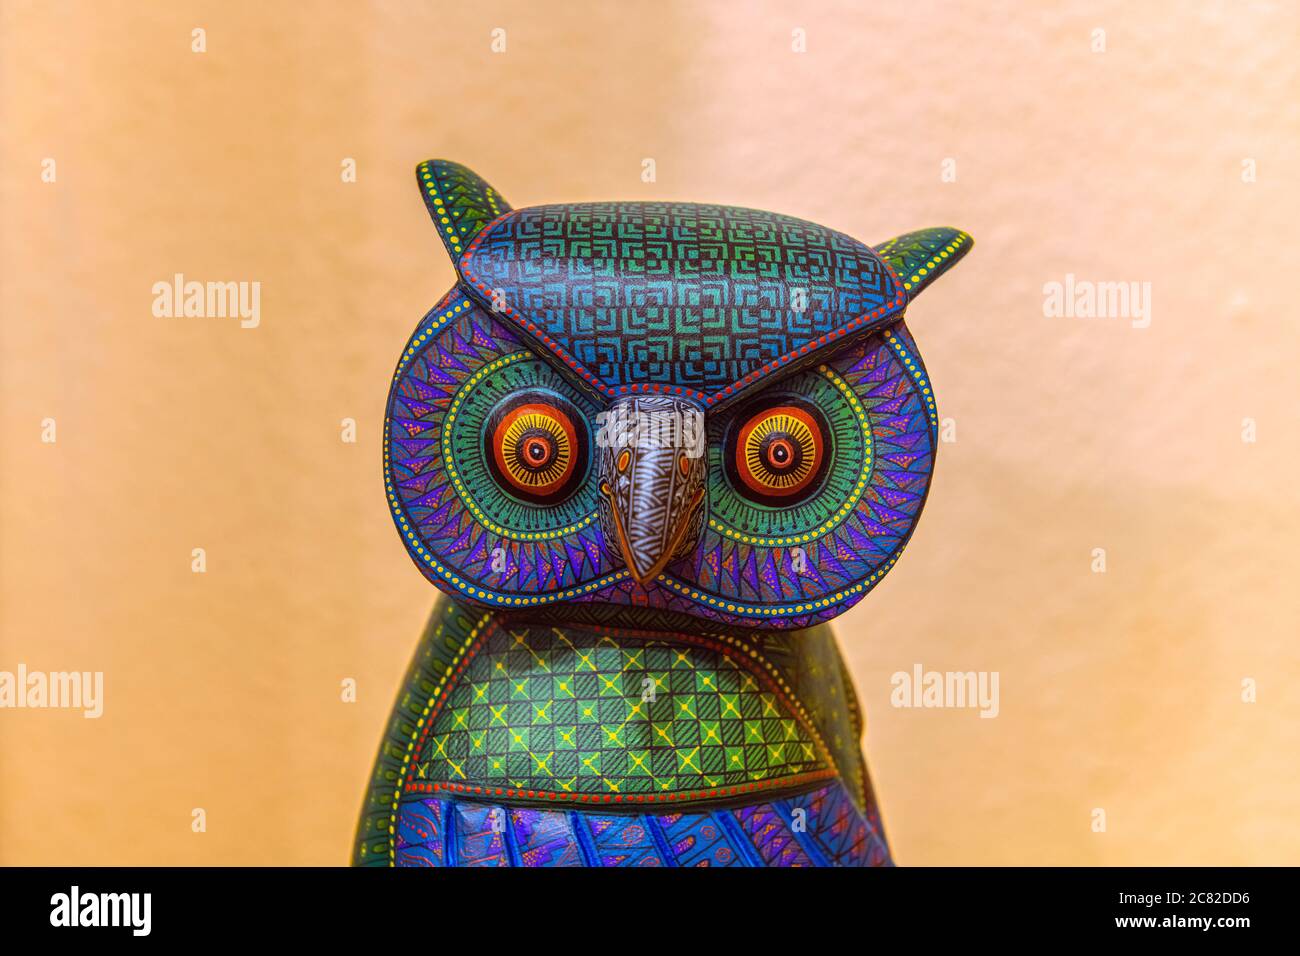 Painted wooden animal carving in the form of an owl known as alebrijes with orange background, Oaxaca, Mexico. Stock Photo